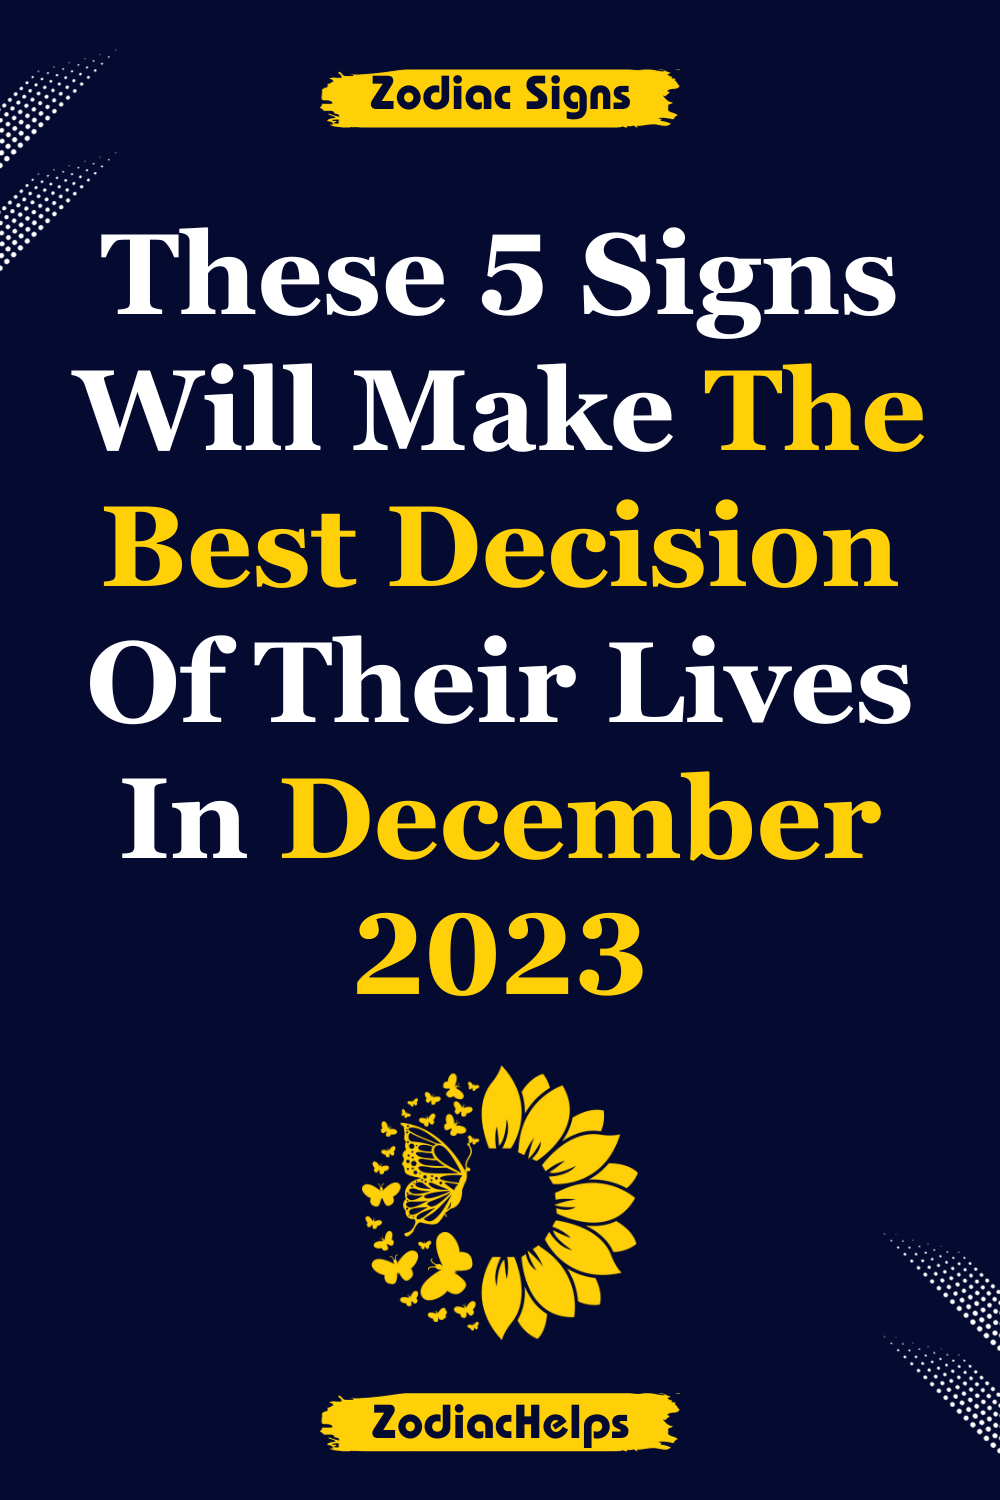 These 5 Signs Will Make The Best Decision Of Their Lives In December 2023